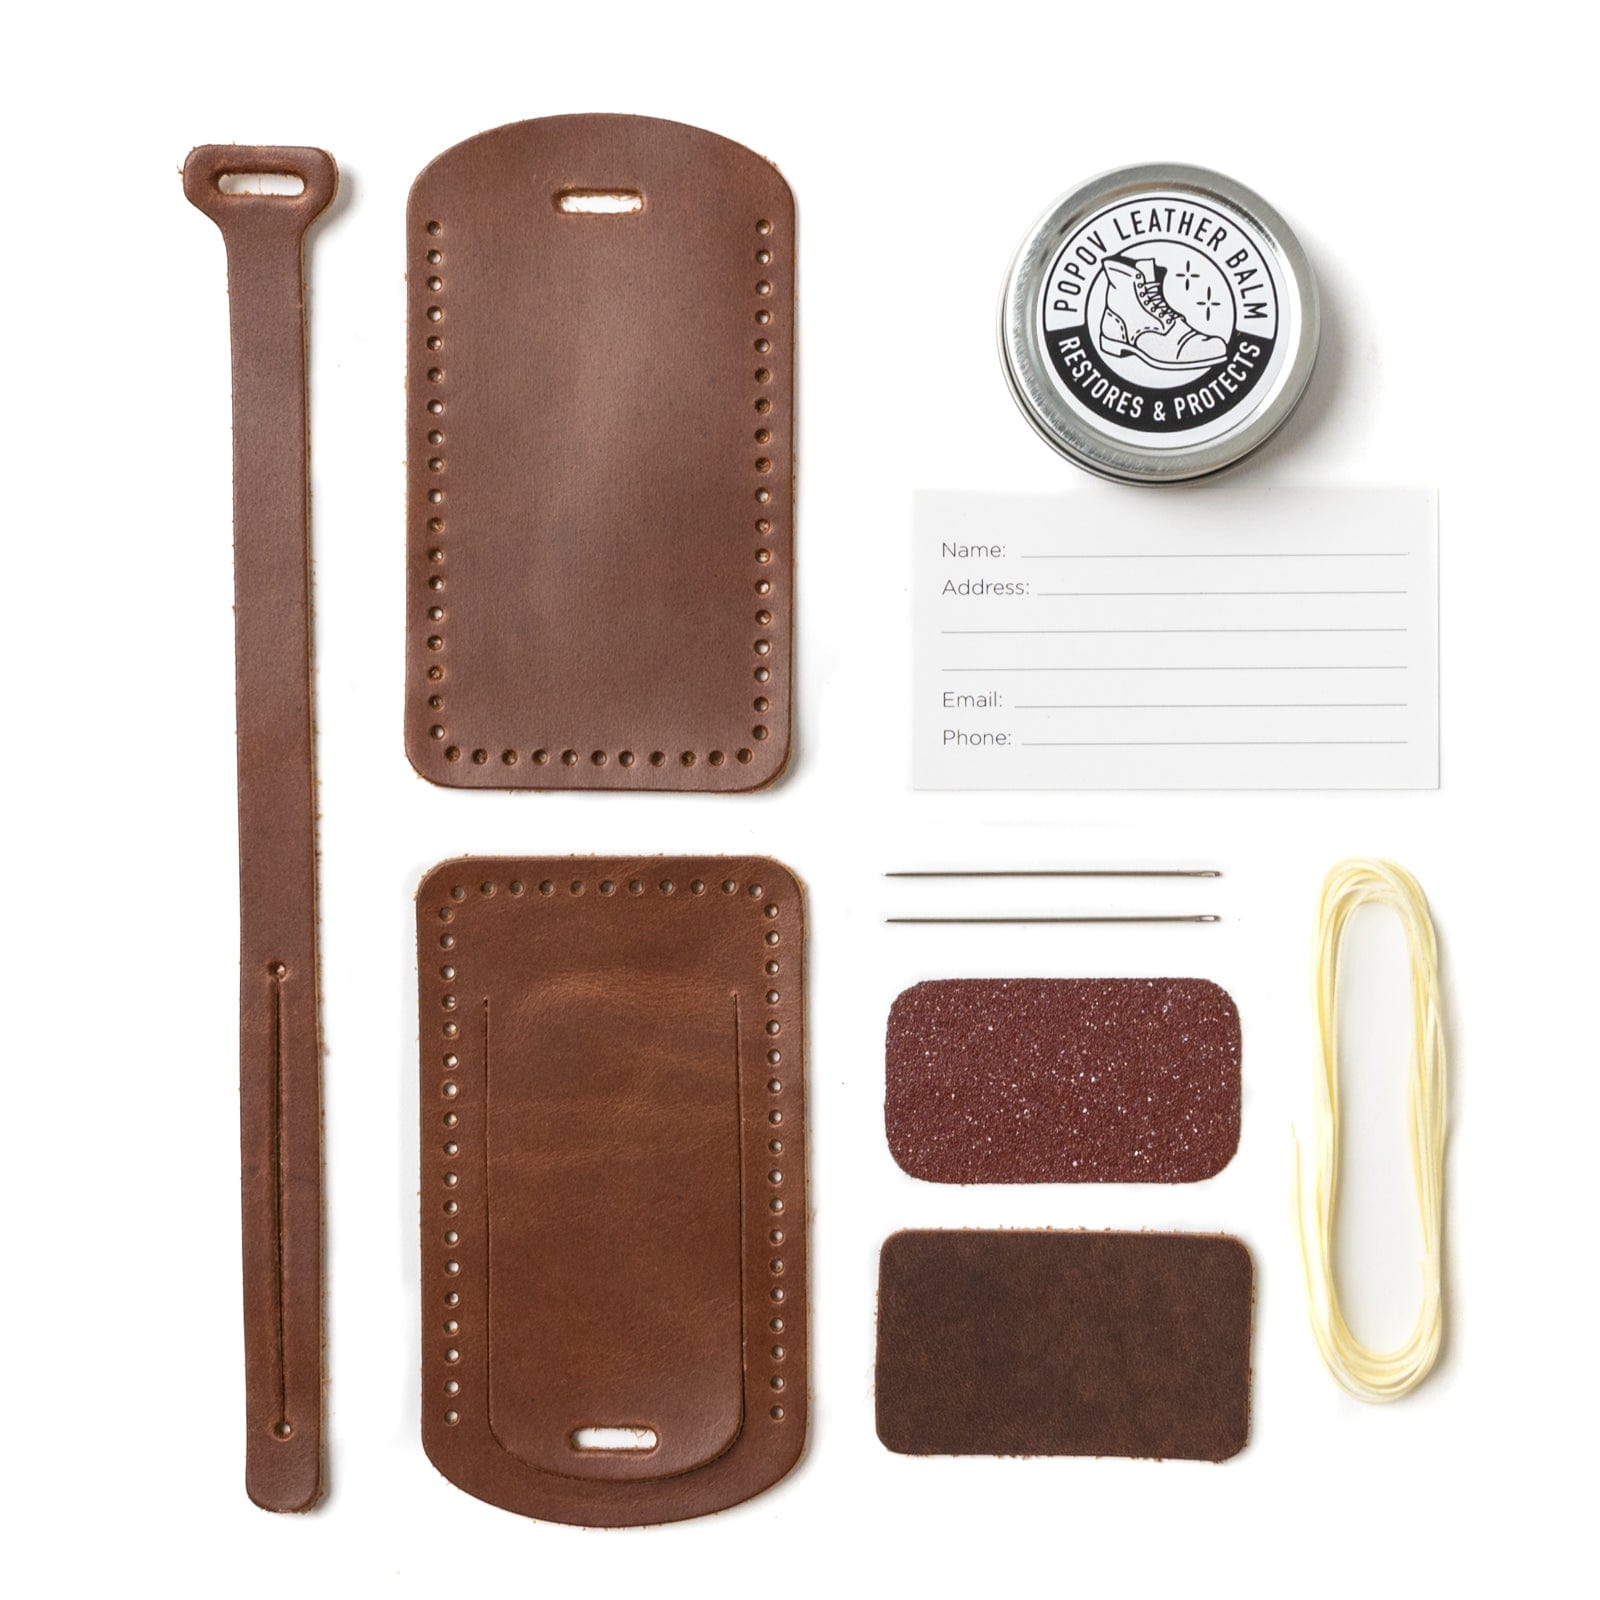 DIY Leather Luggage Tag Kit - Natural Popov Leather®